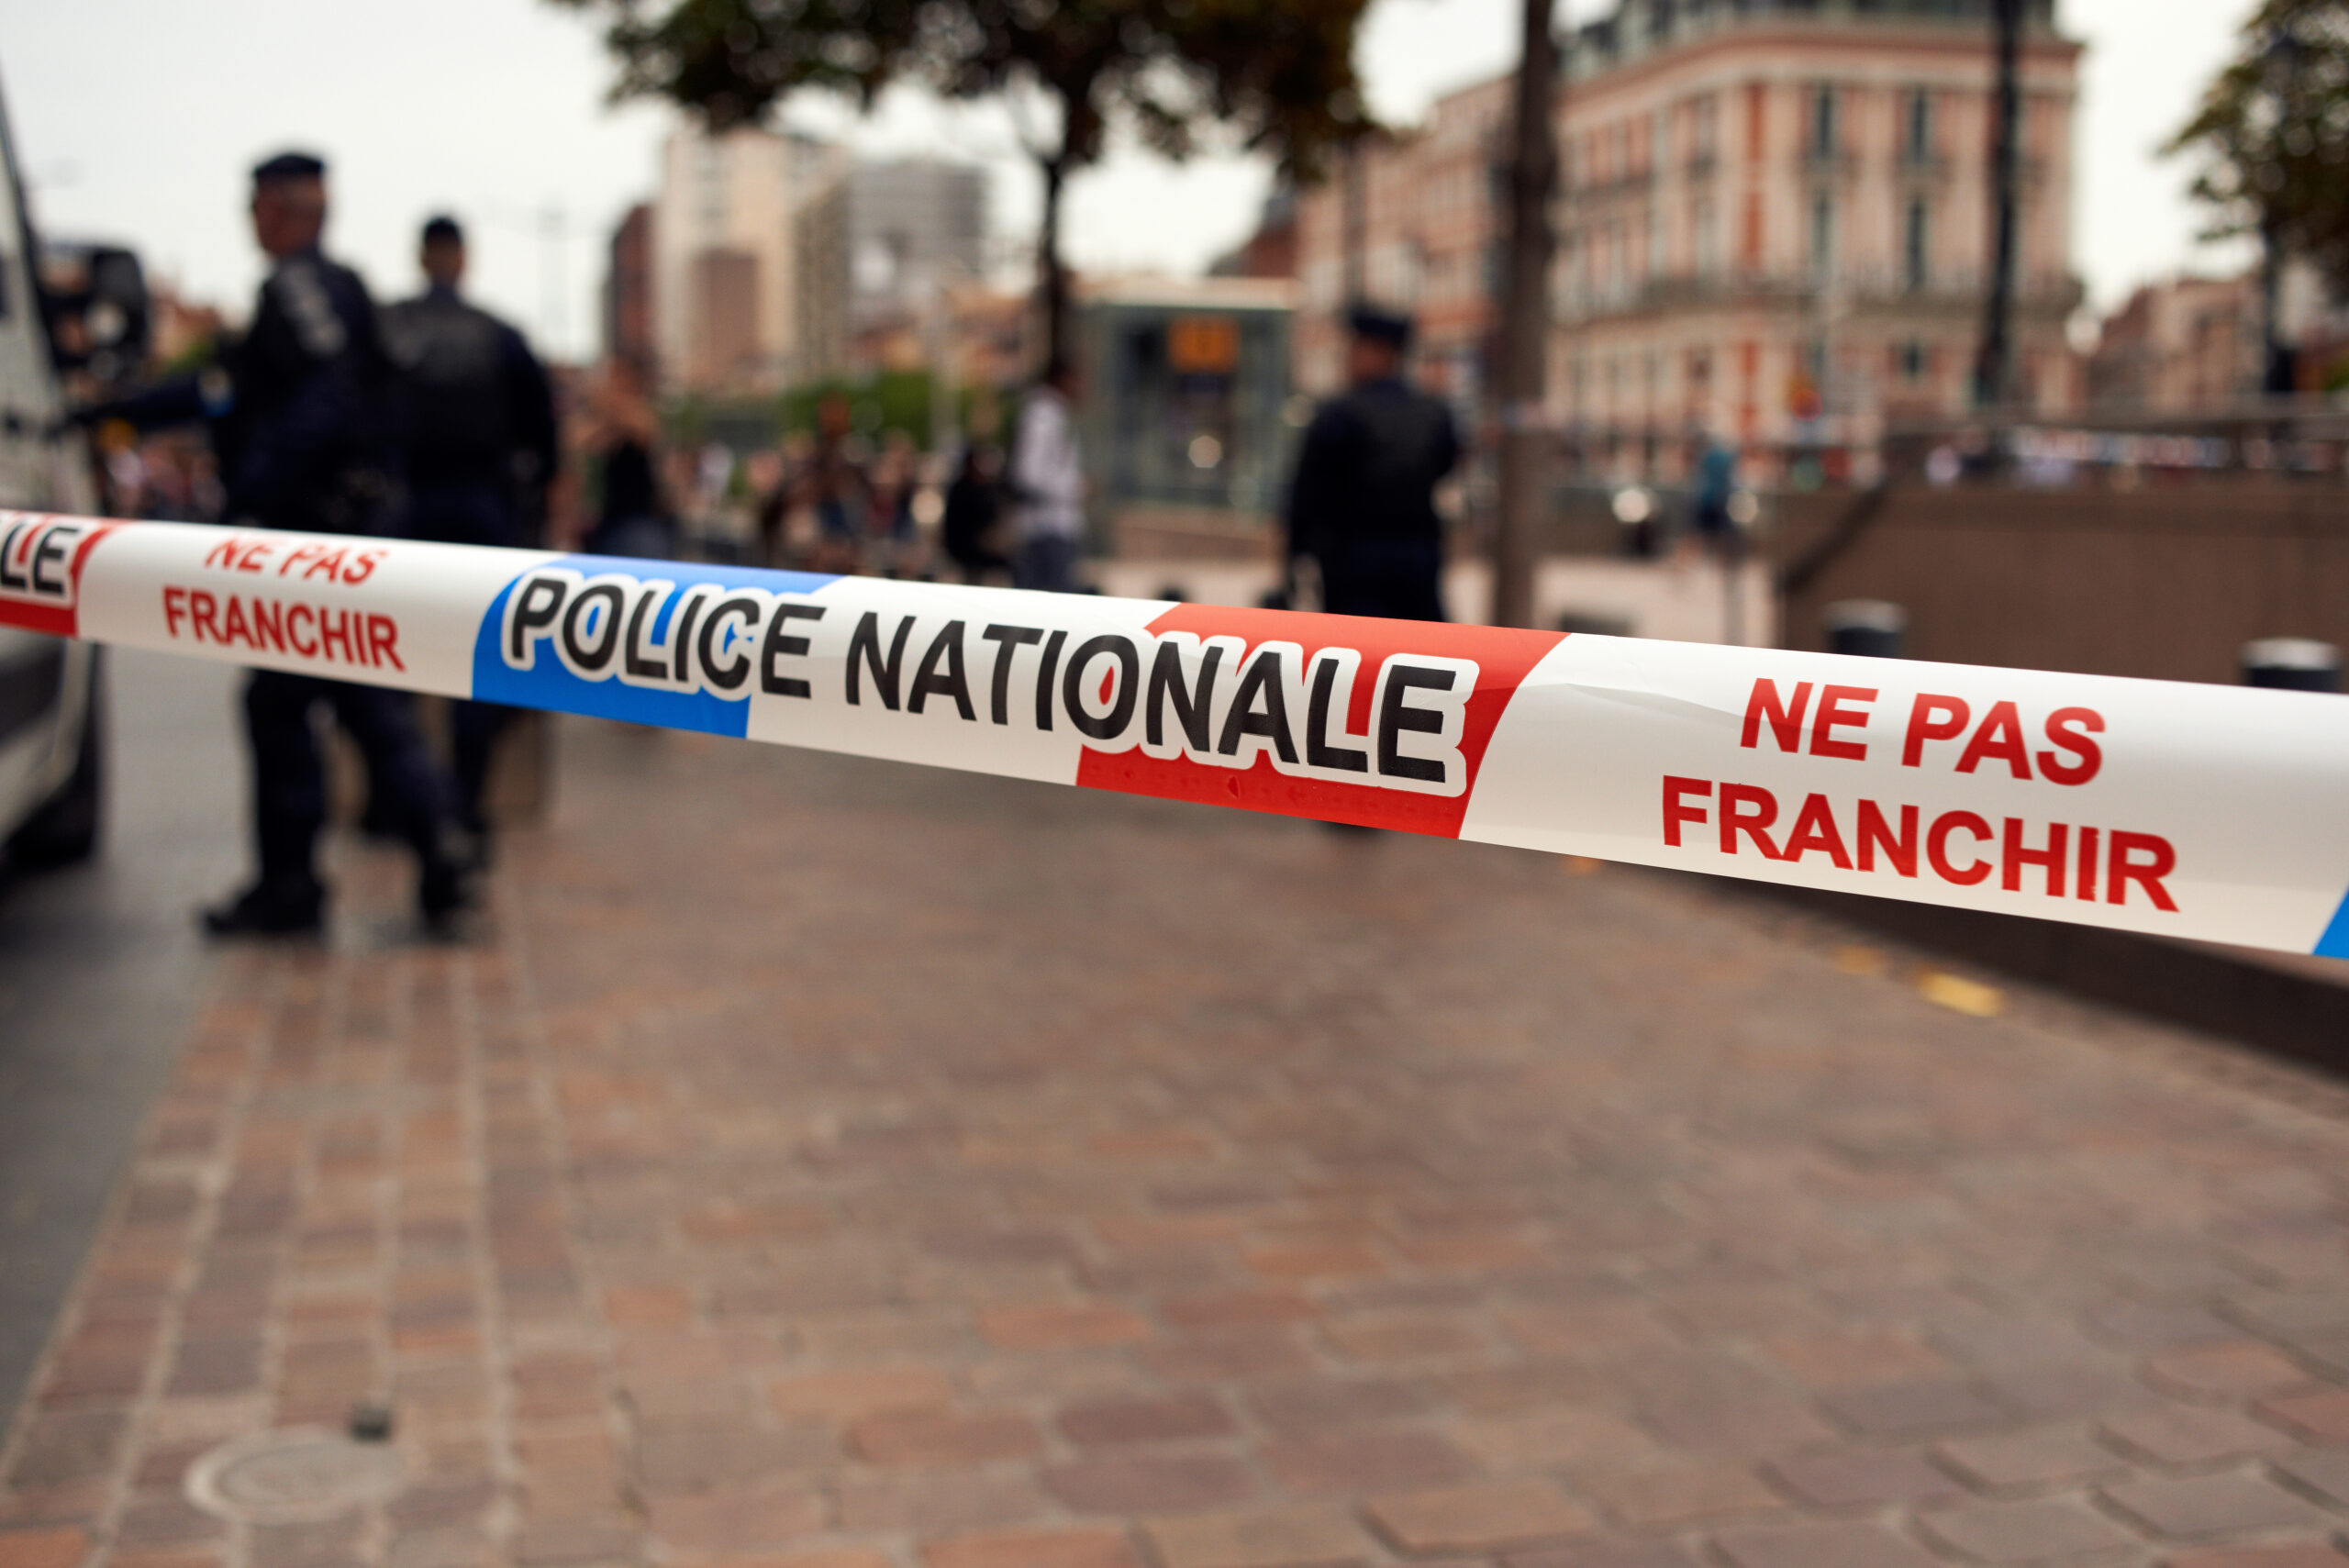 Syrian refugee stabs several children on French playground, police report.